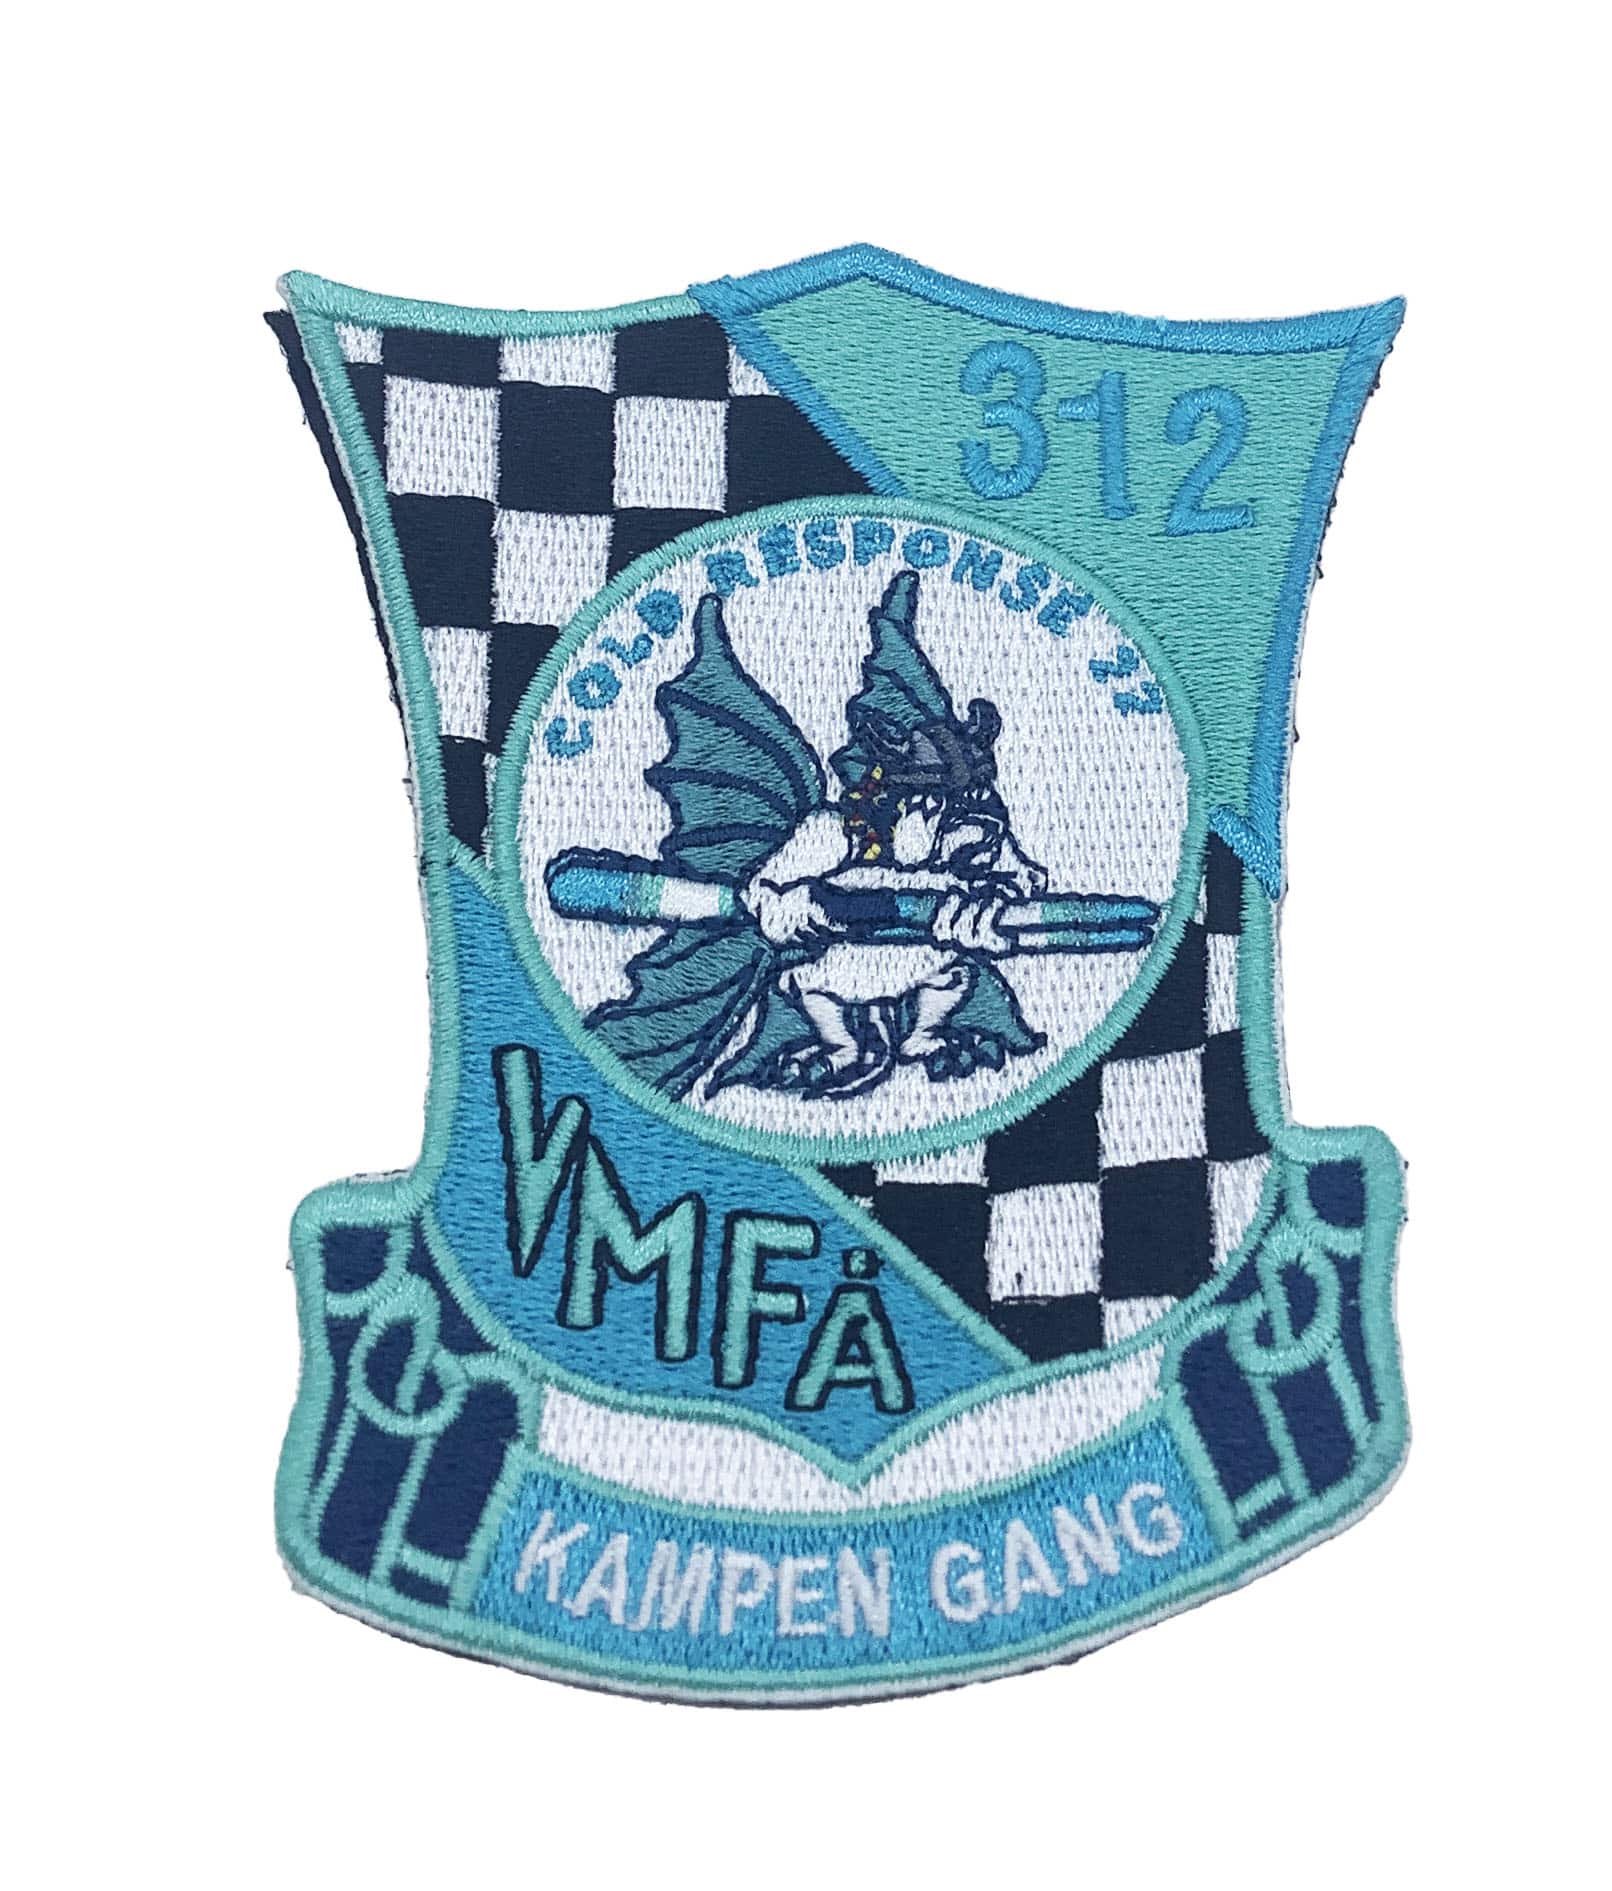 VMFA-312 Cold Response 2022 Patch - No Hook and Loop